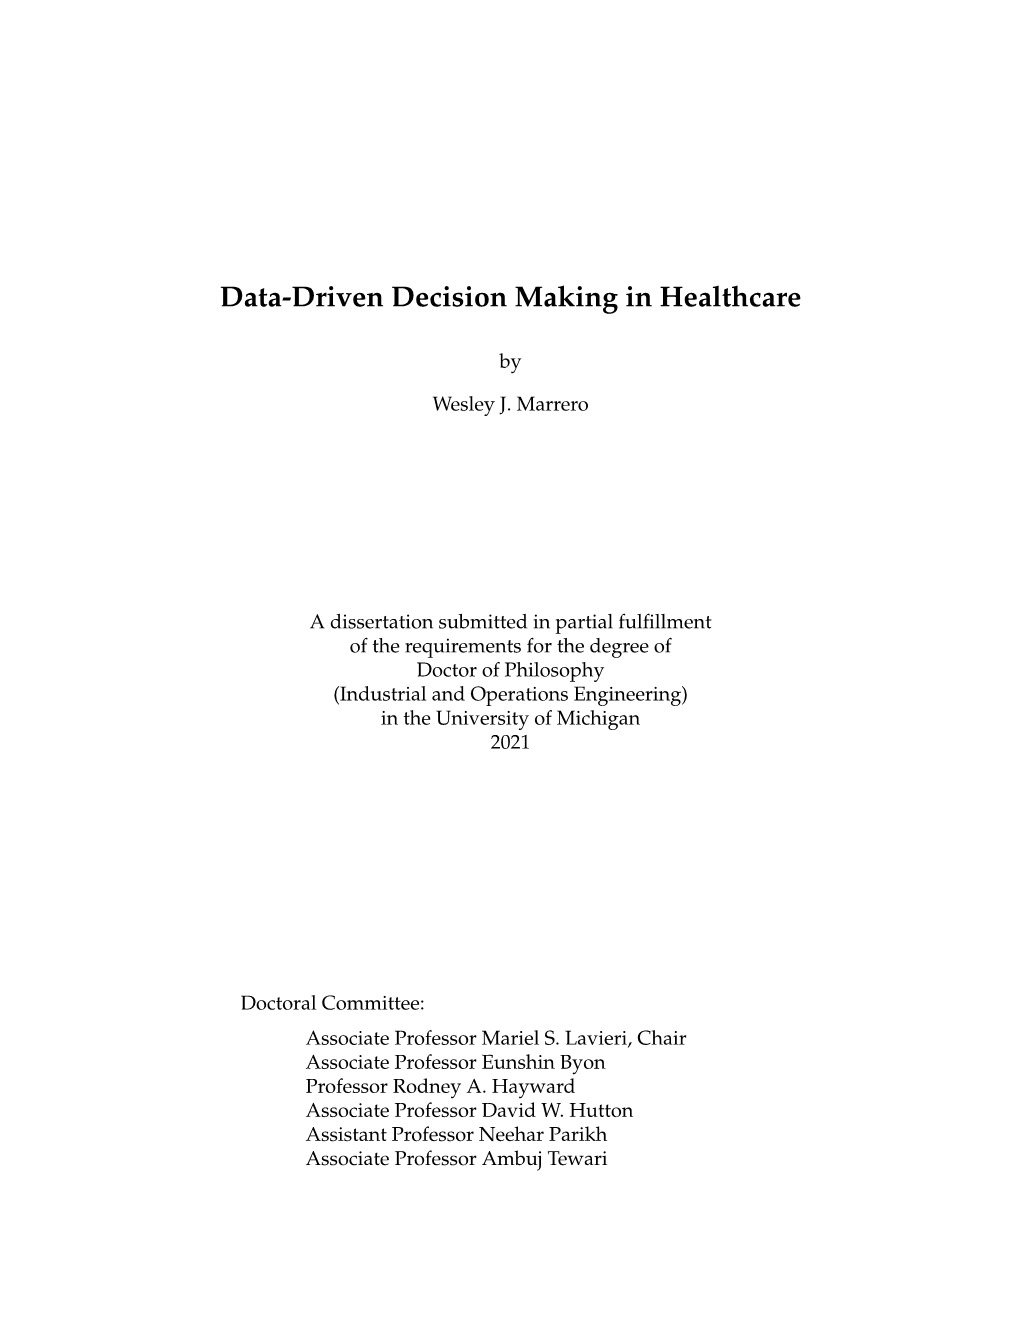 Data-Driven Decision Making in Healthcare